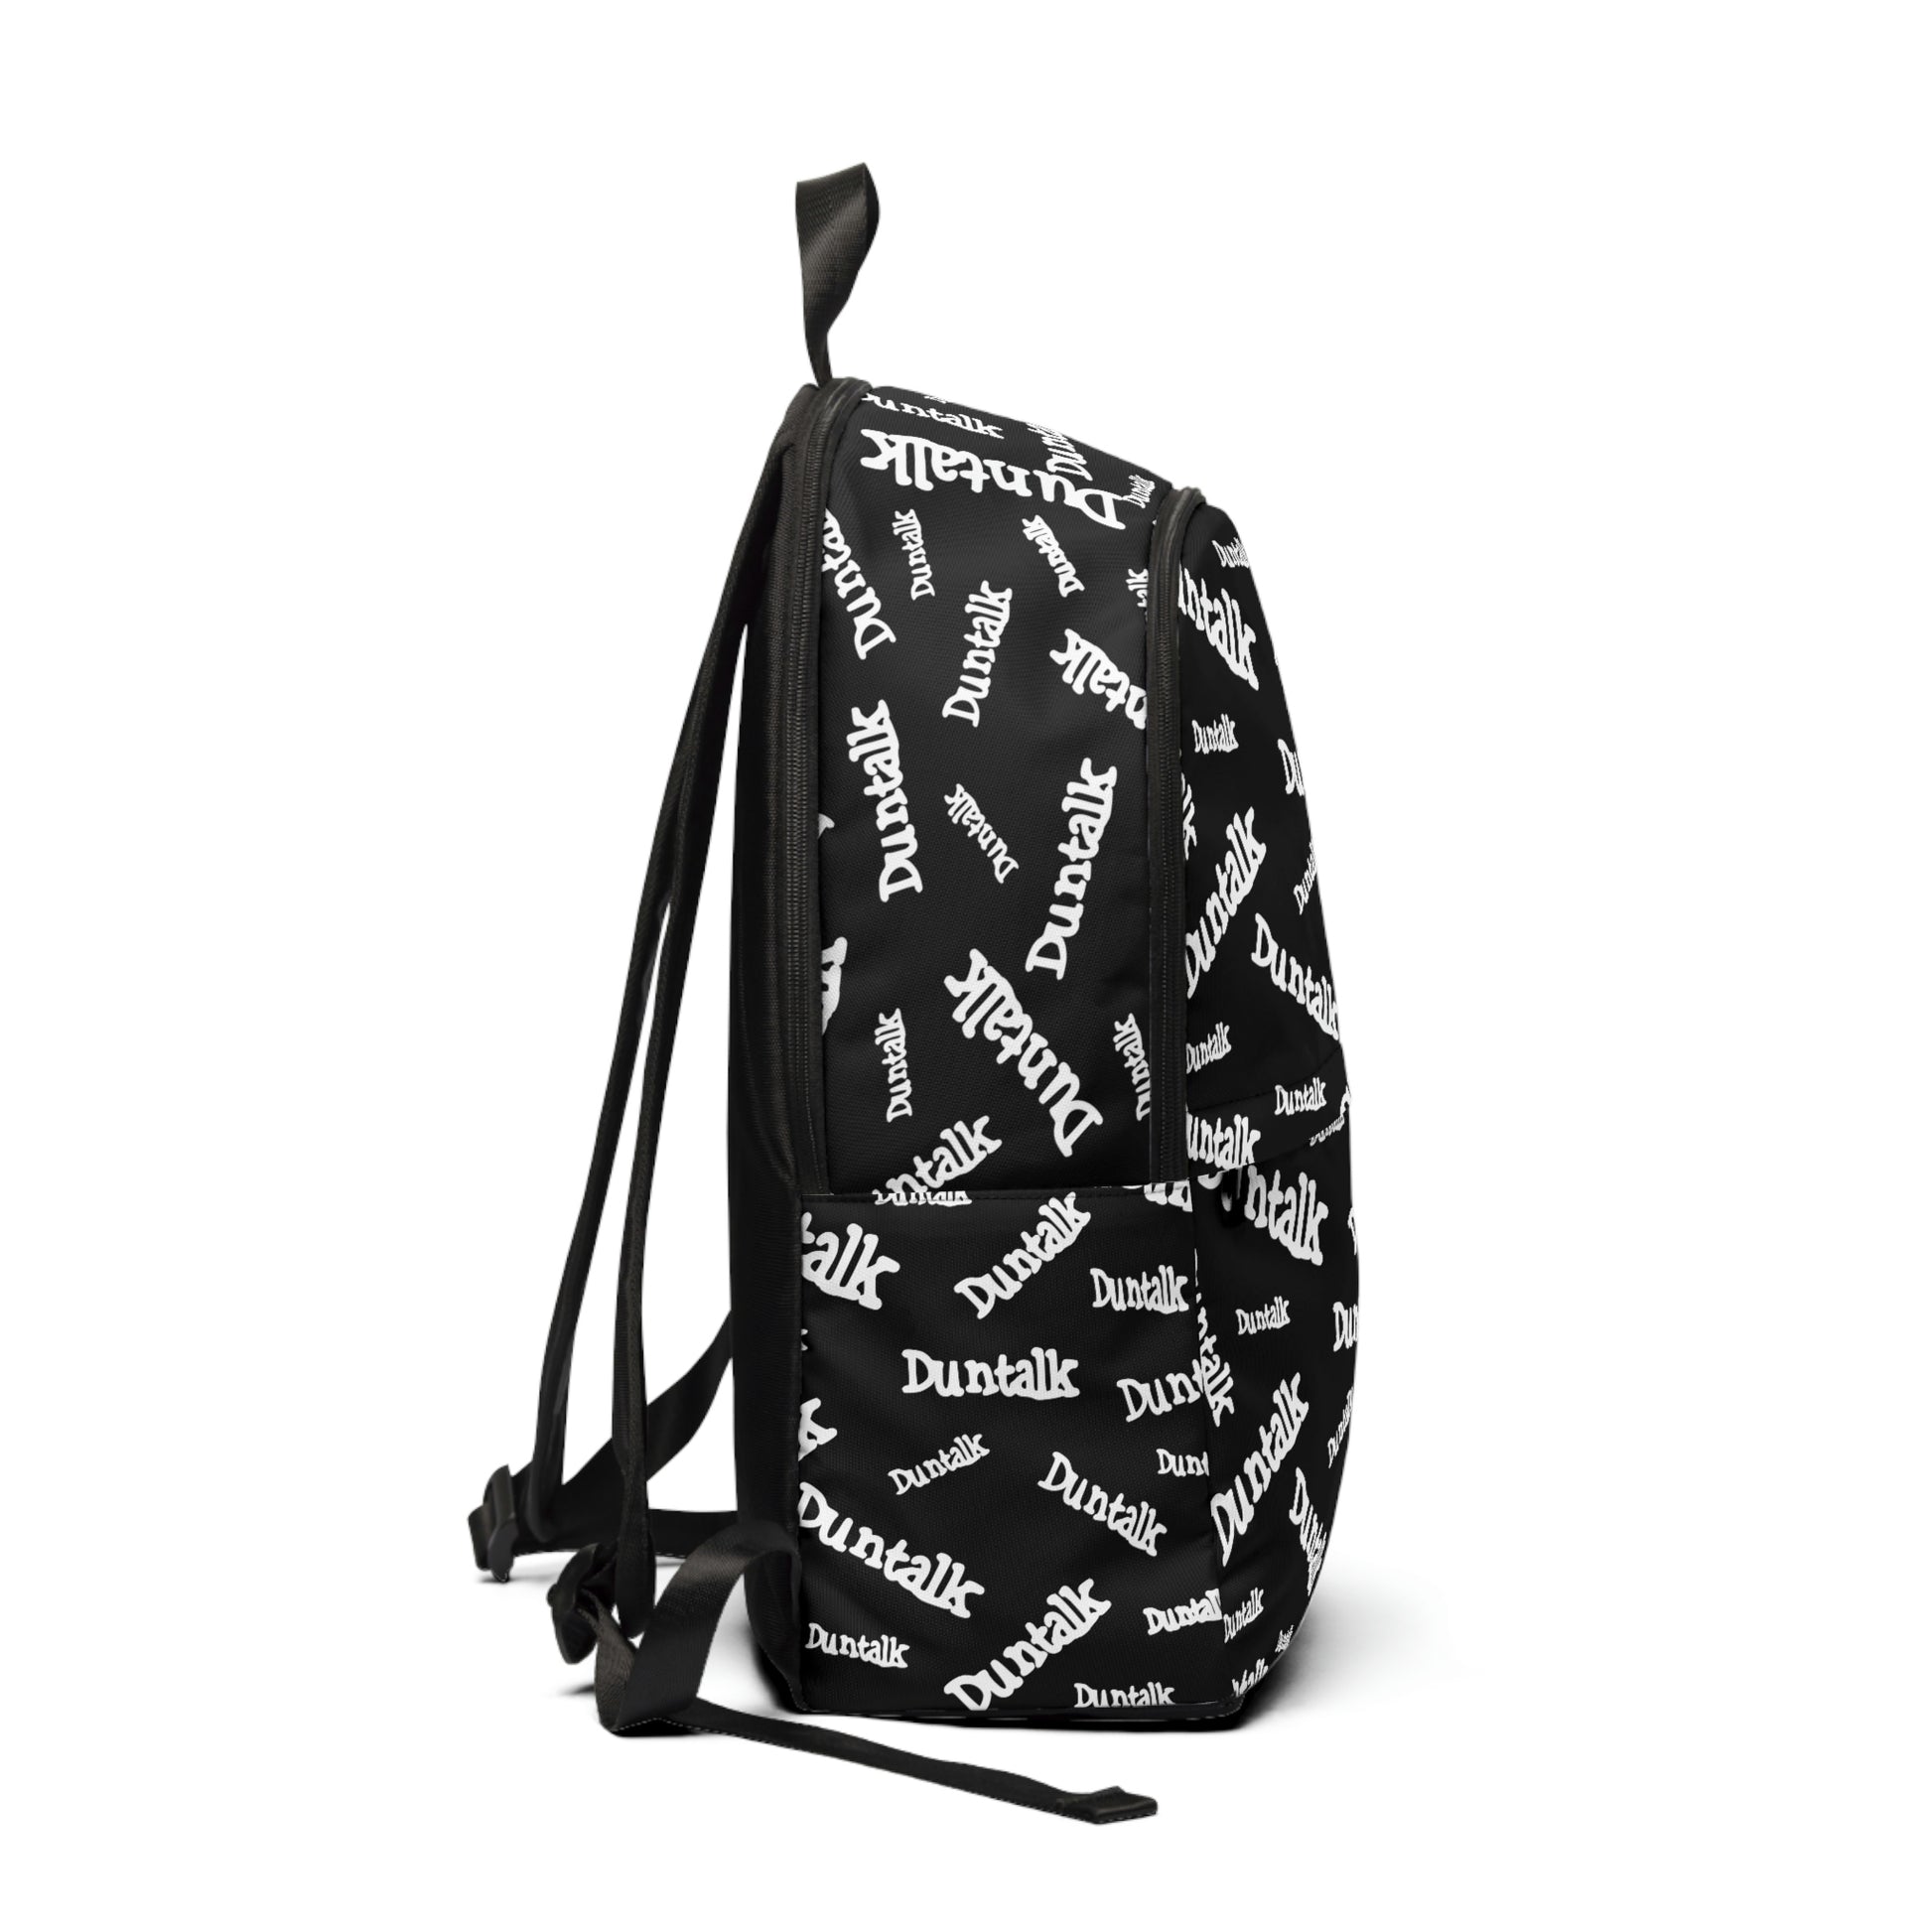 Black backpack in white print writing saying "Duntalk" with large and small pocket